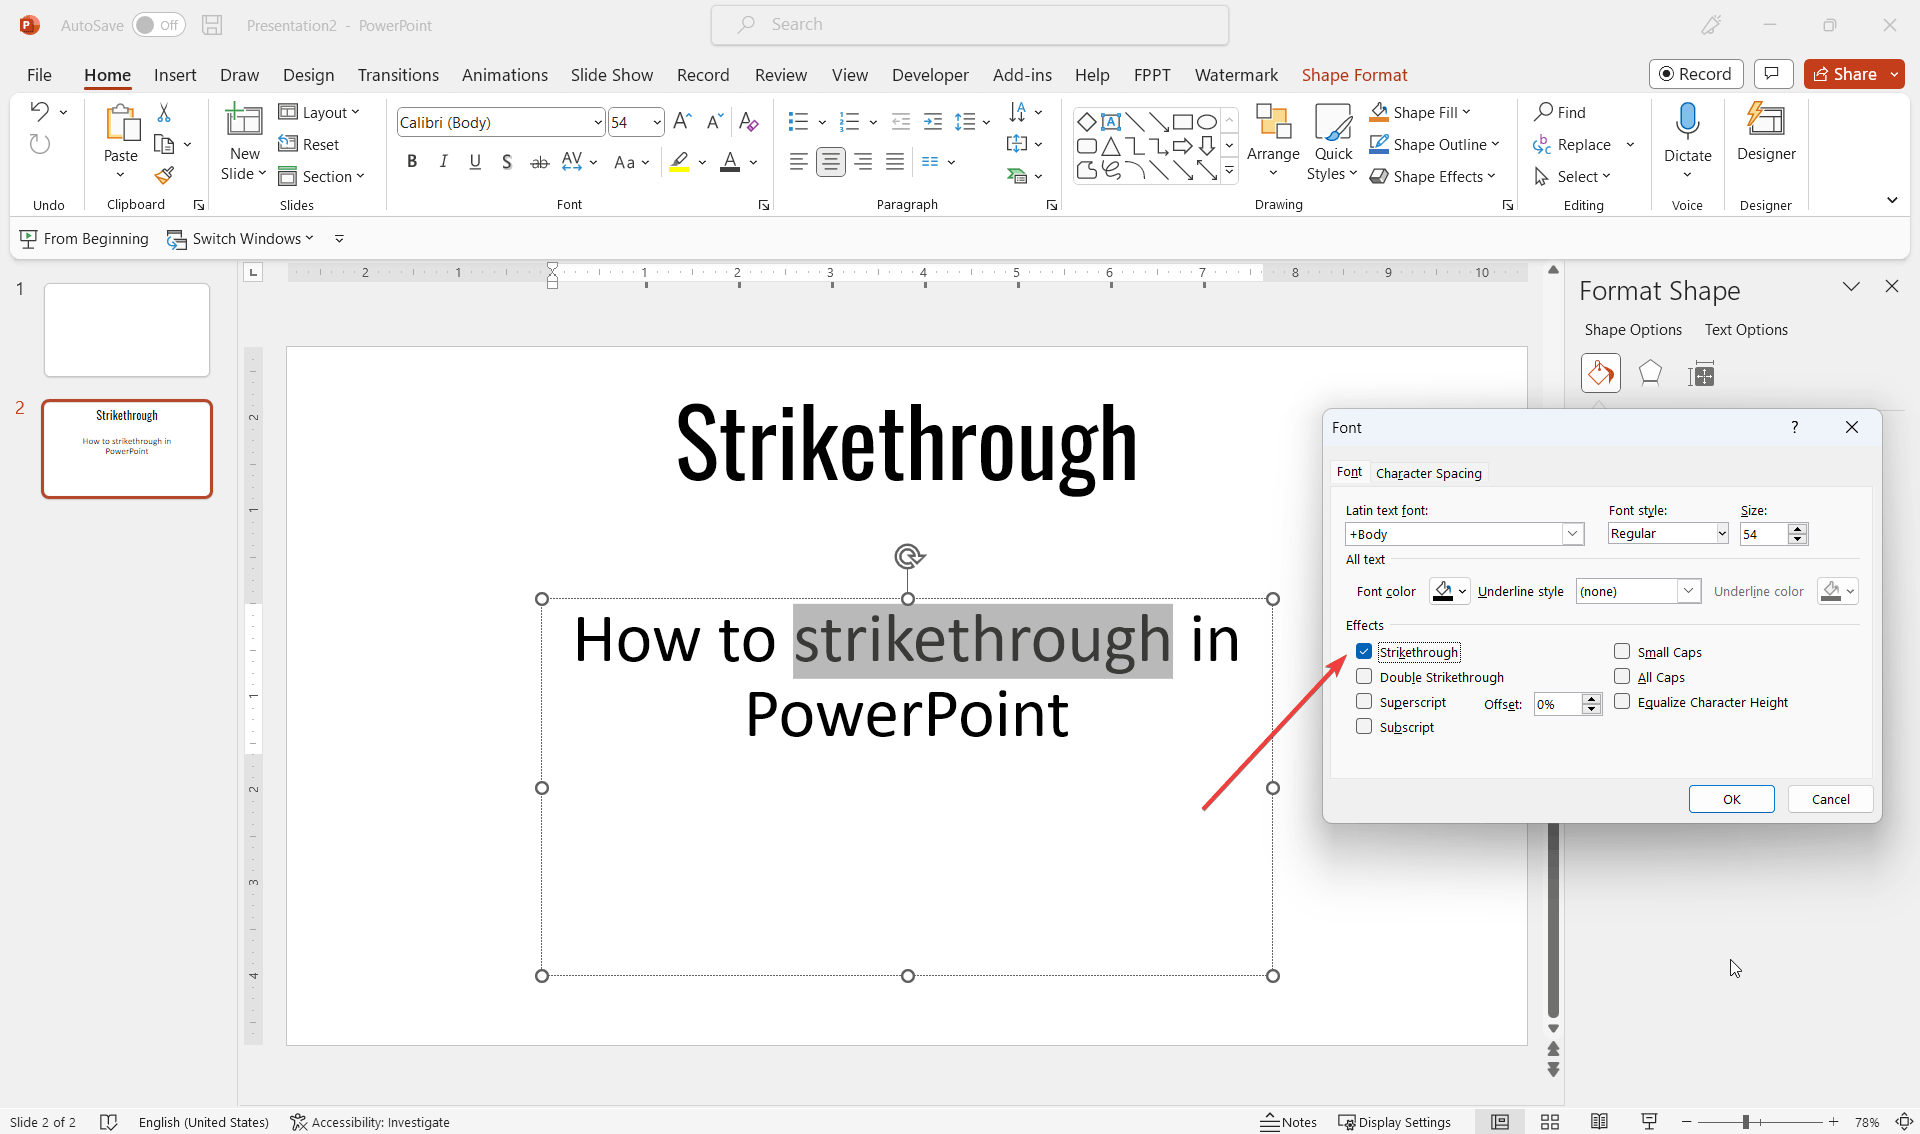 How to Strikethrough in PowerPoint?